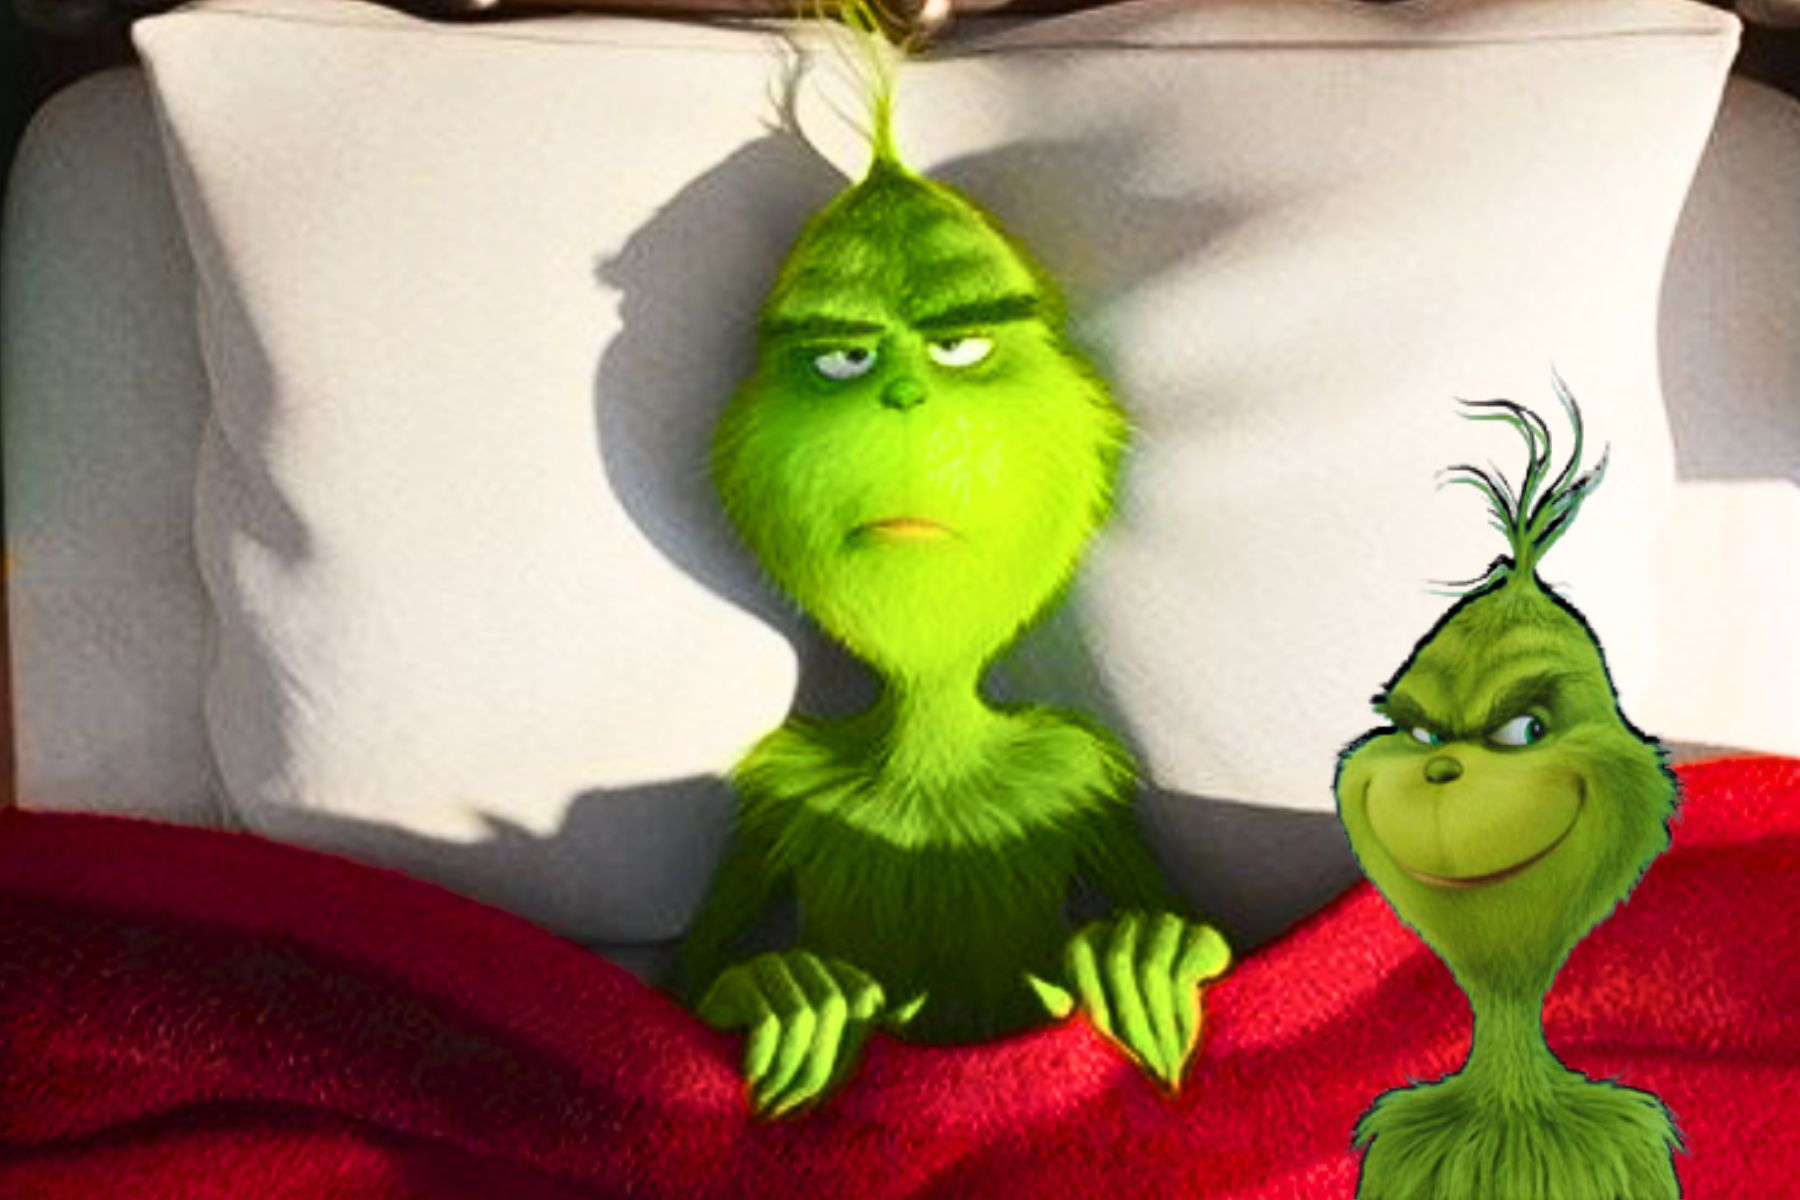 The Grinch 2